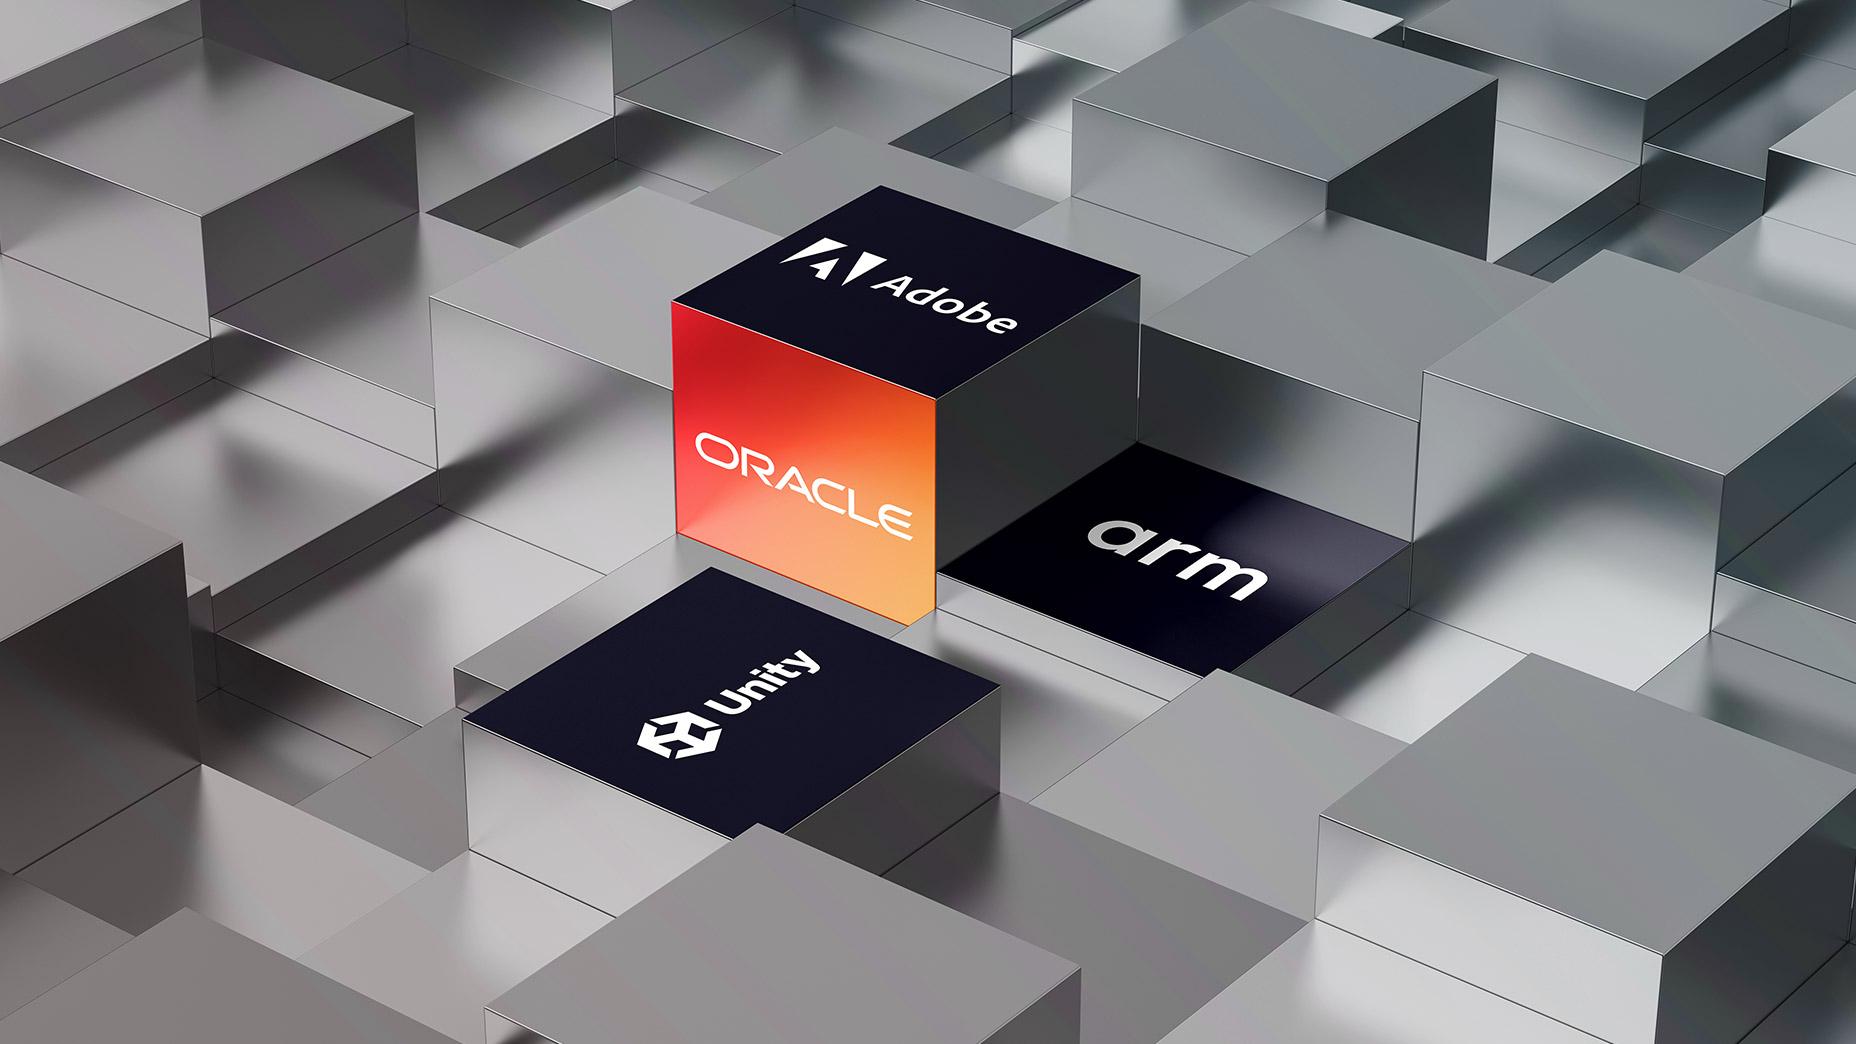 Oracle Adobe Unity Arm quarterly earnings report